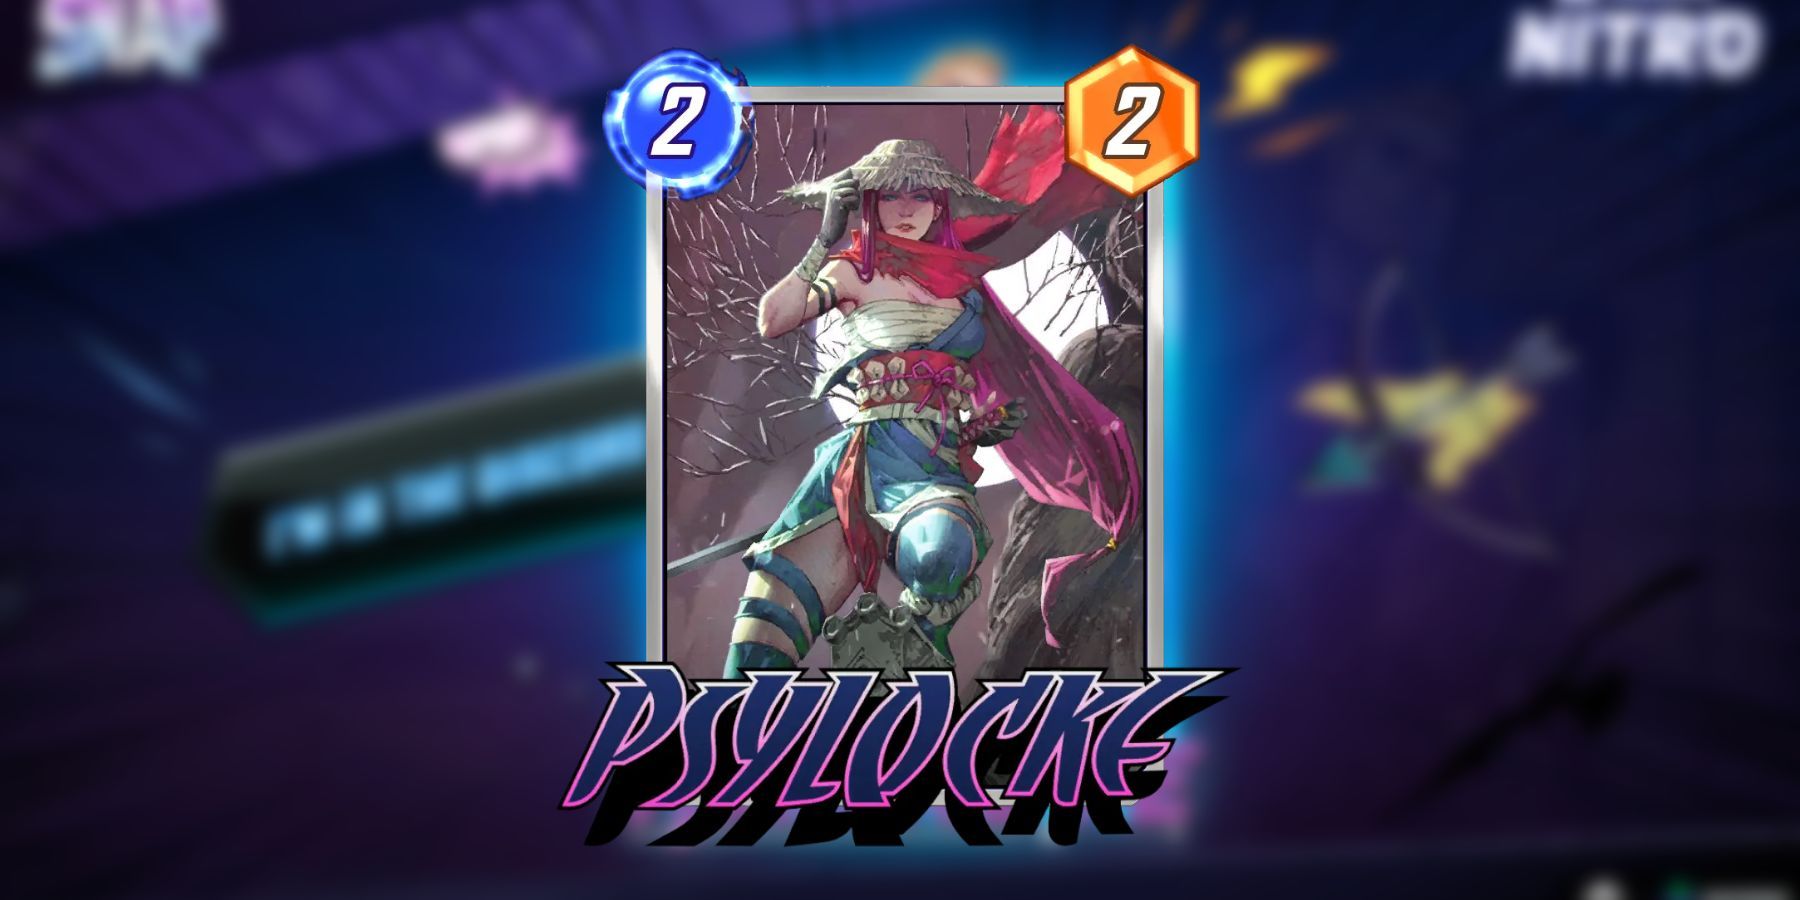 image showing the psylocke card in marvel snap.